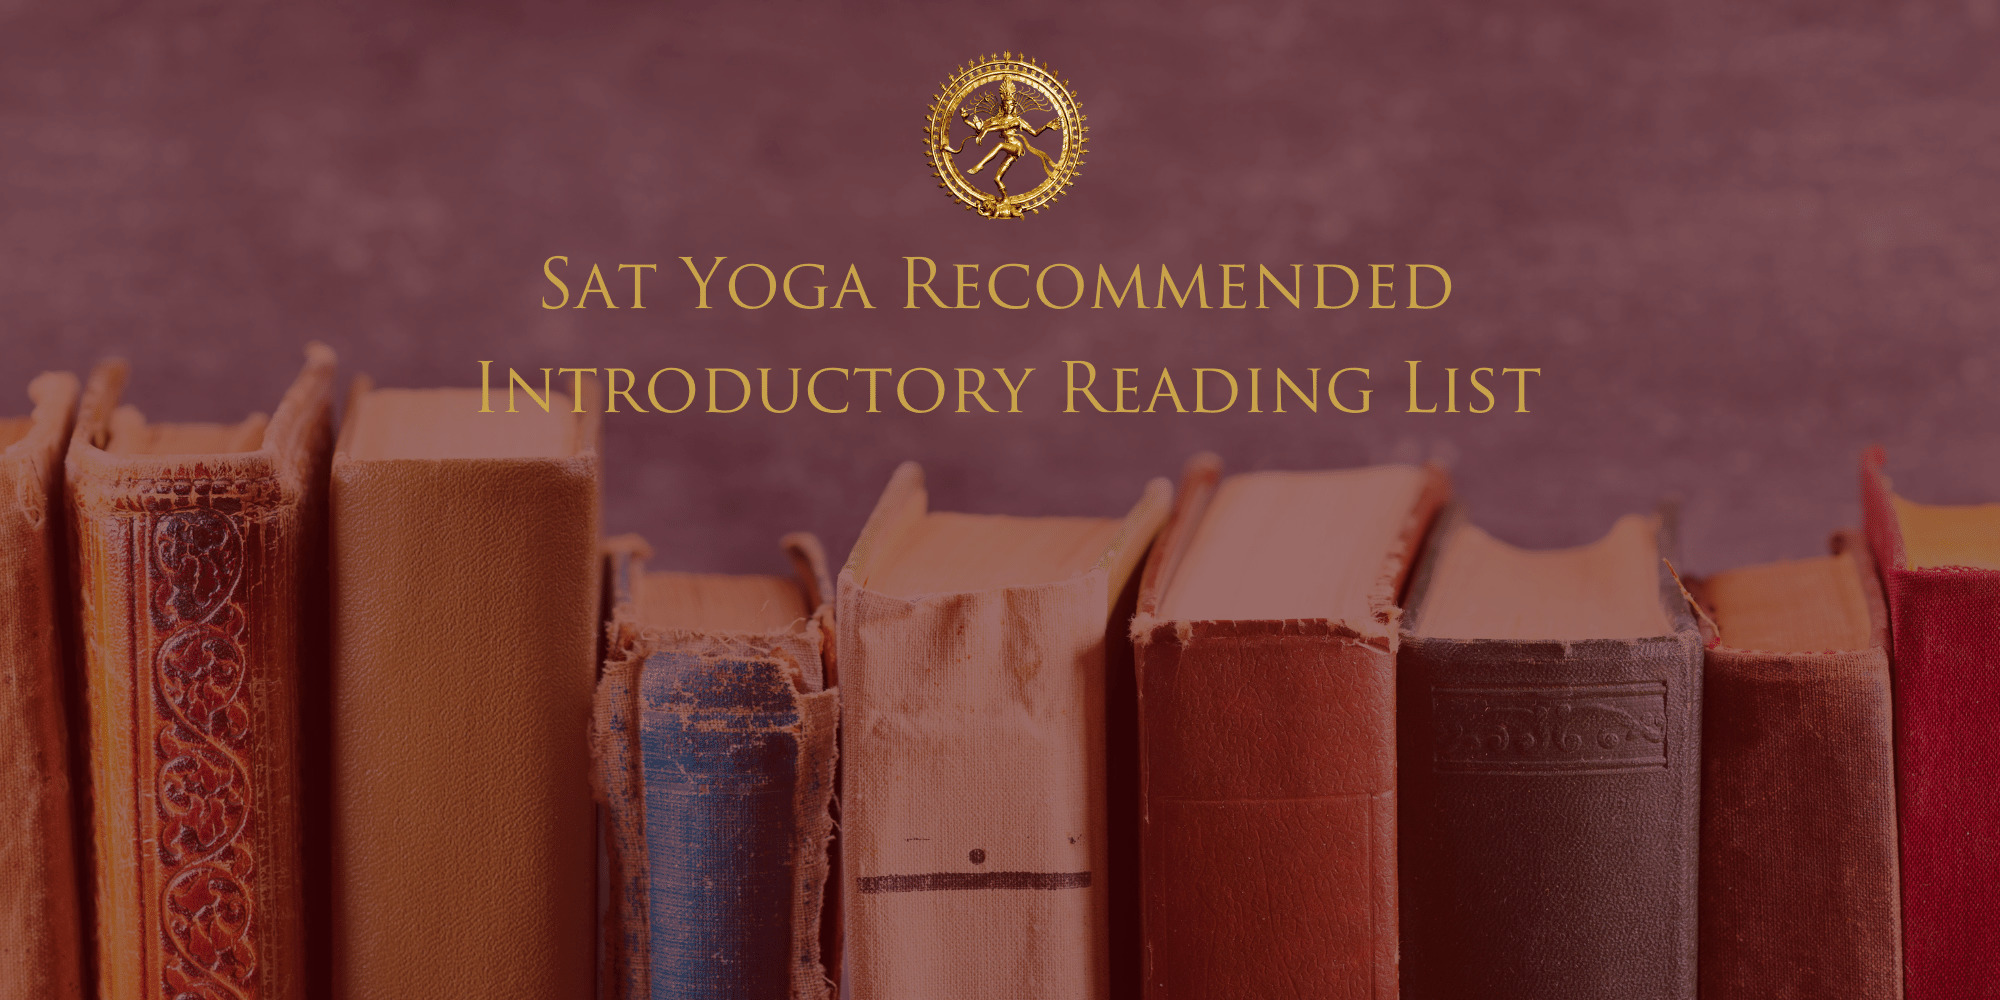 Sat Yoga Introductory Reading List